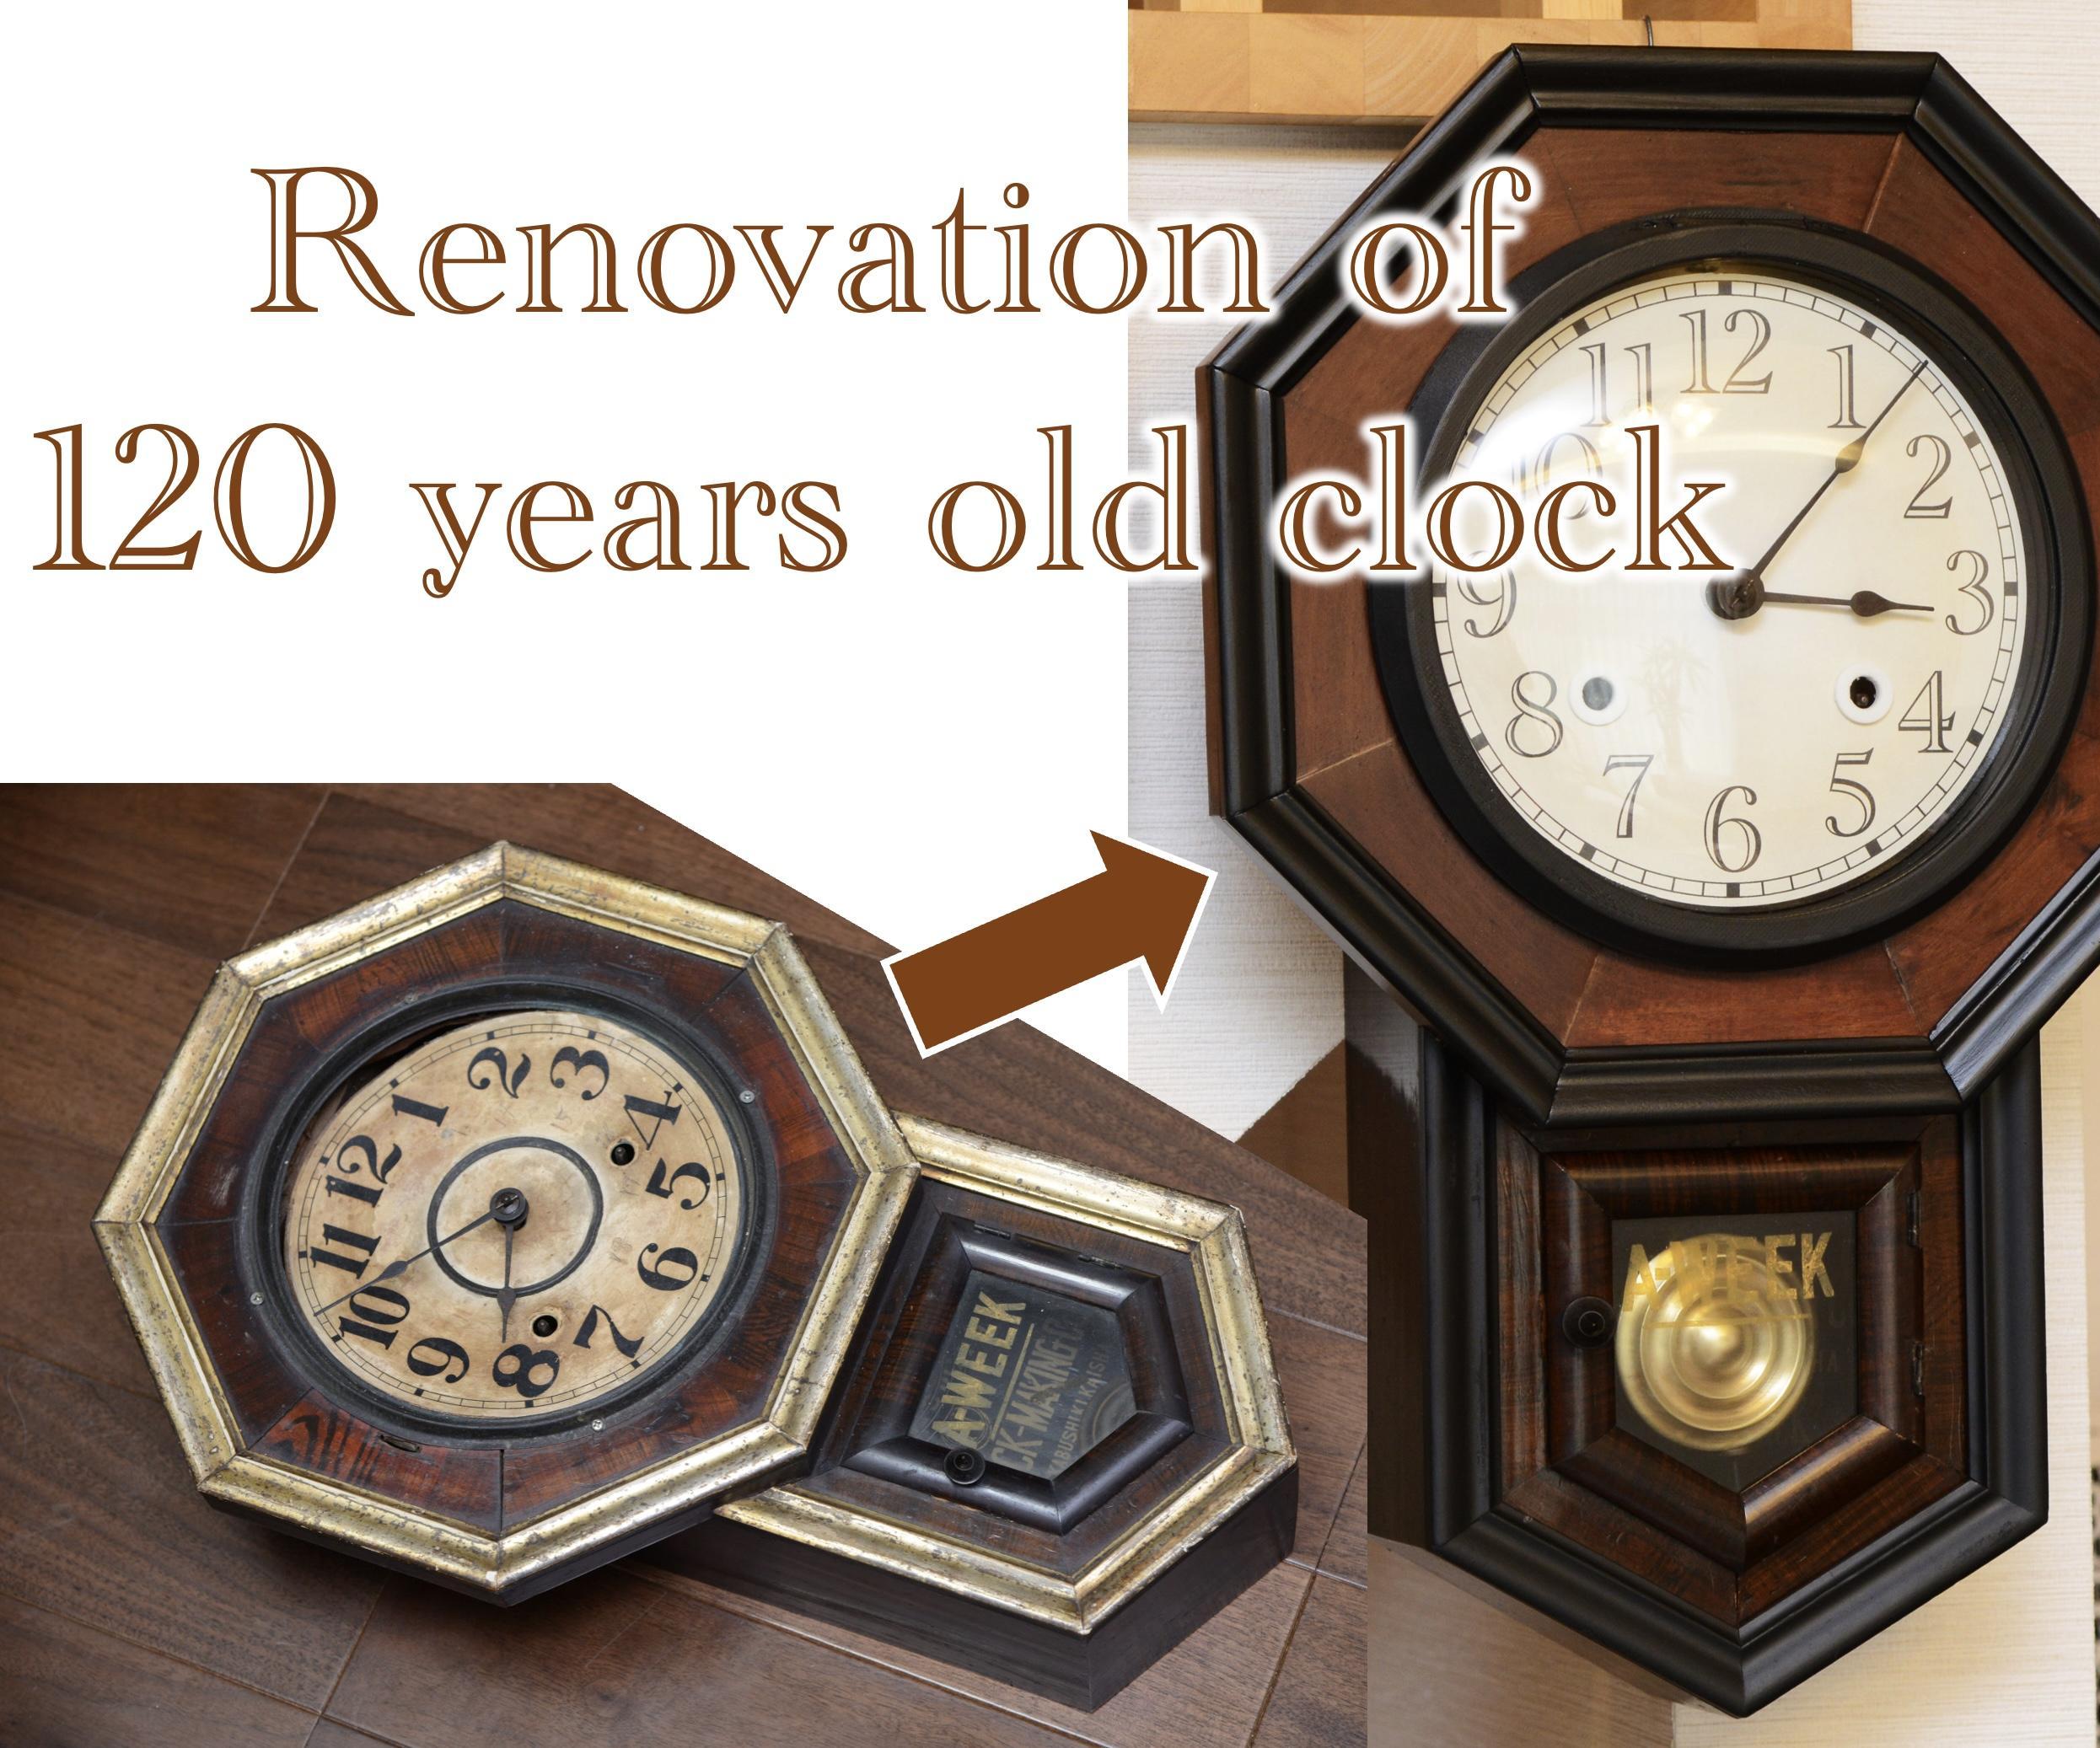 Renovation of 120 Years Old Clock